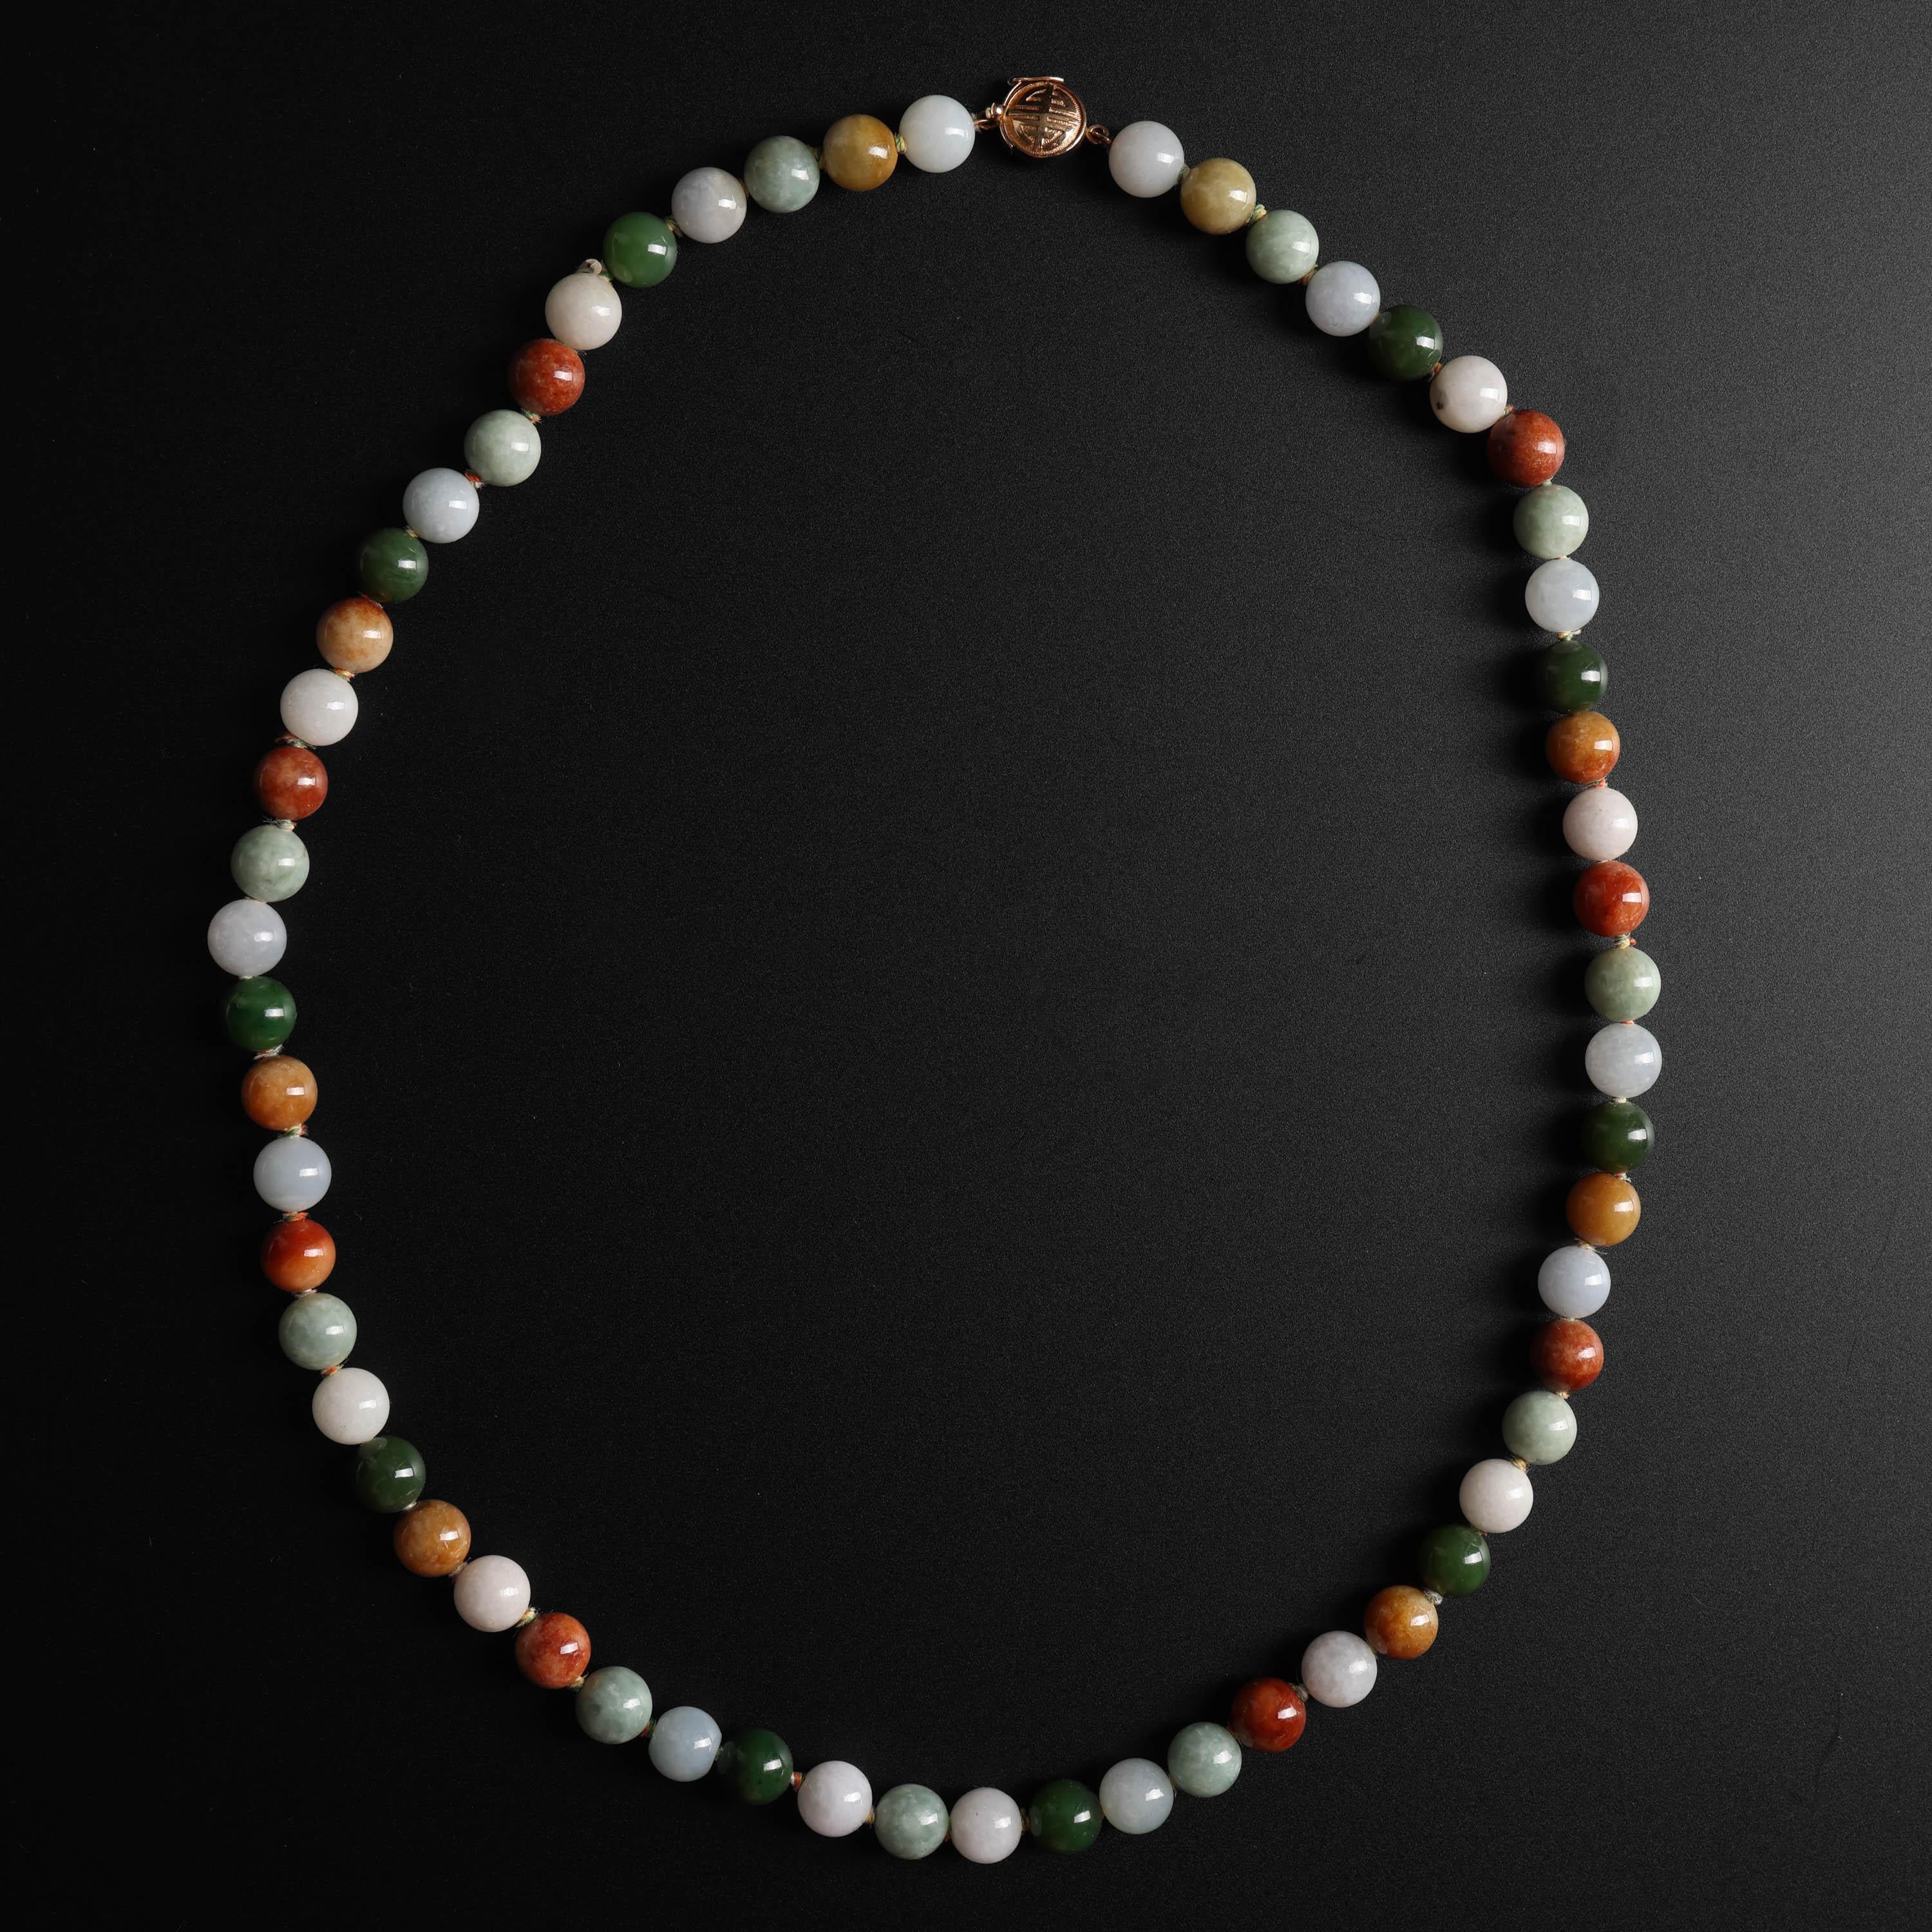 A Gump's jade necklace from the 1960s, still on its original string. Such a find! The multi-colored jadeite beads average 9mm and there are 59 of them all together, so the necklace measures 23